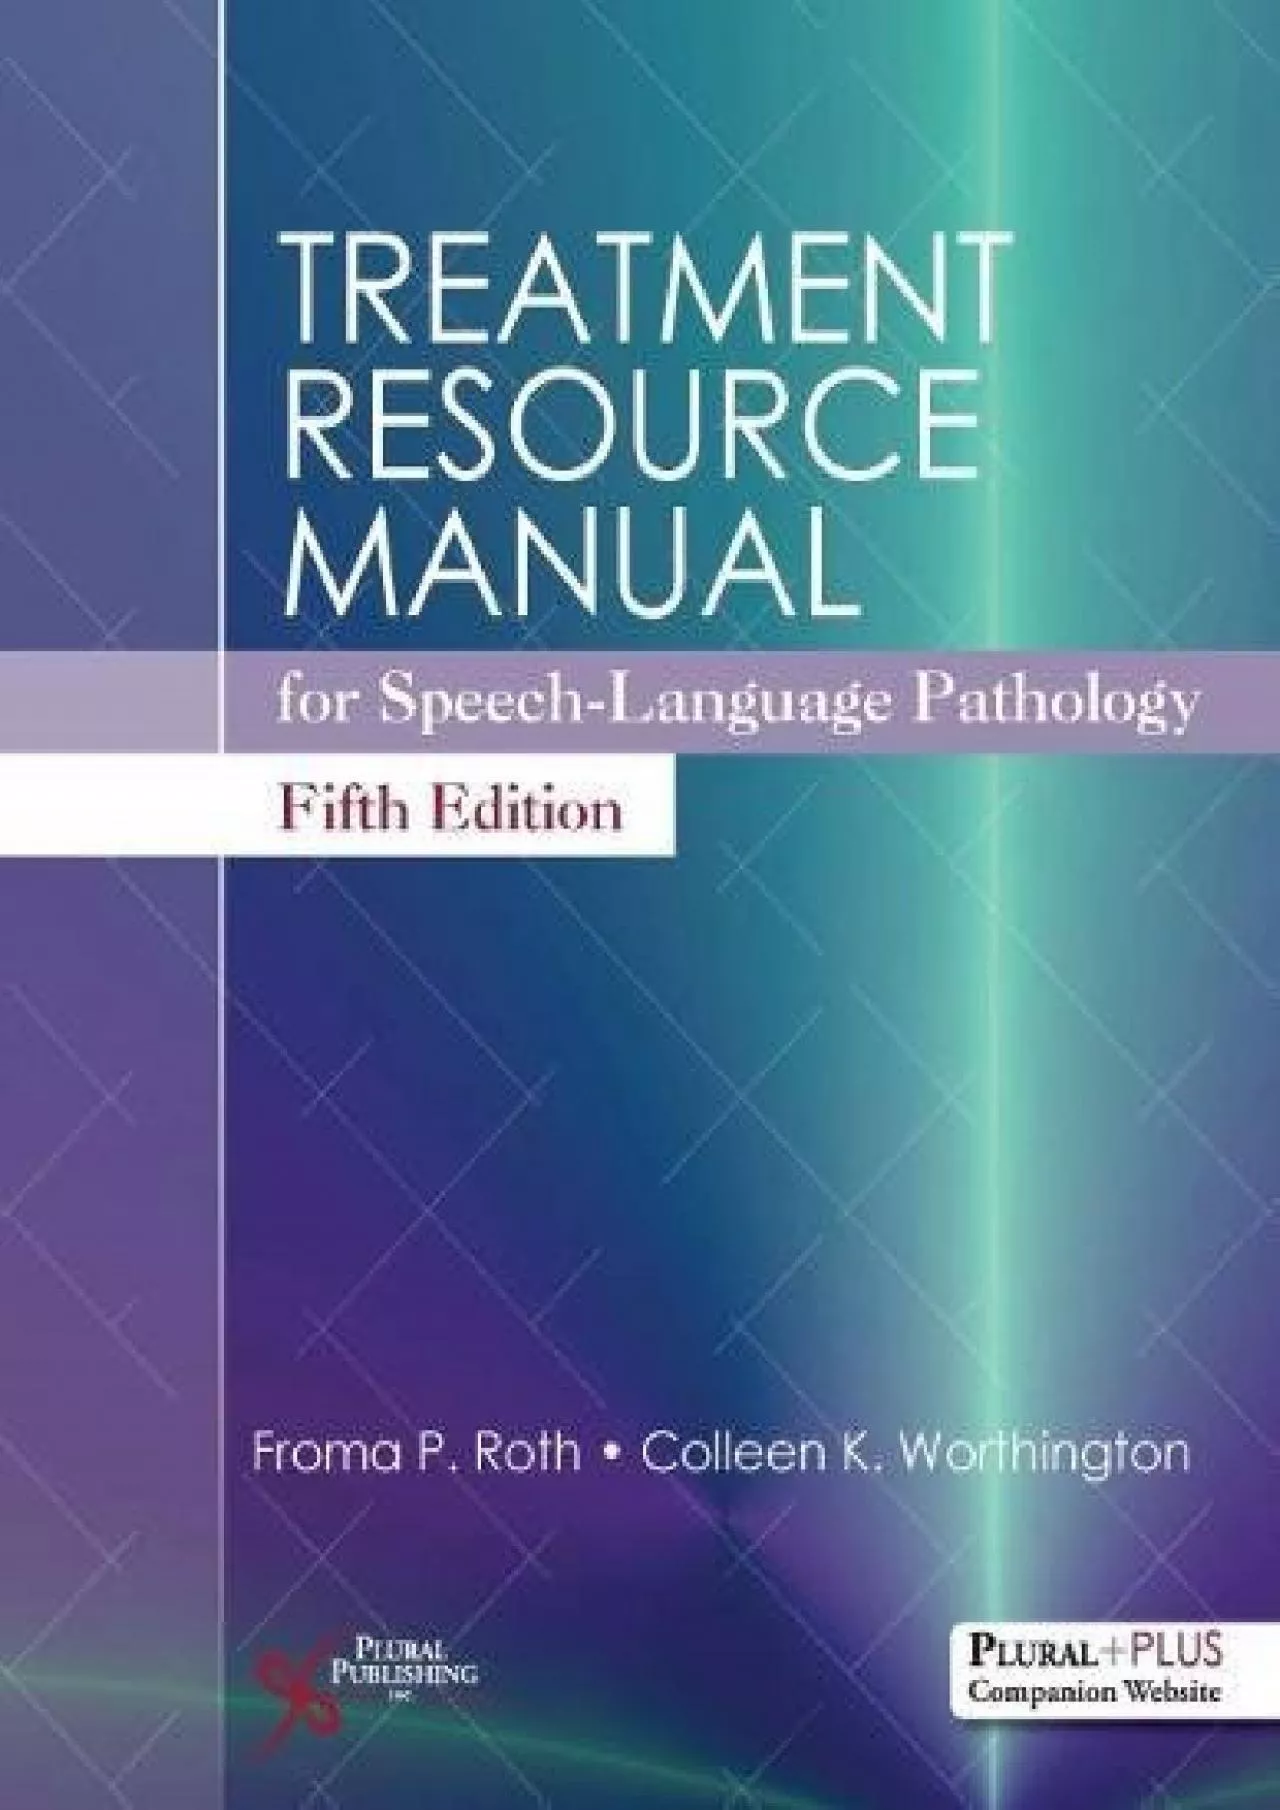 (DOWNLOAD)-Treatment Resource Manual for Speech-Language Pathology, Fifth Edition